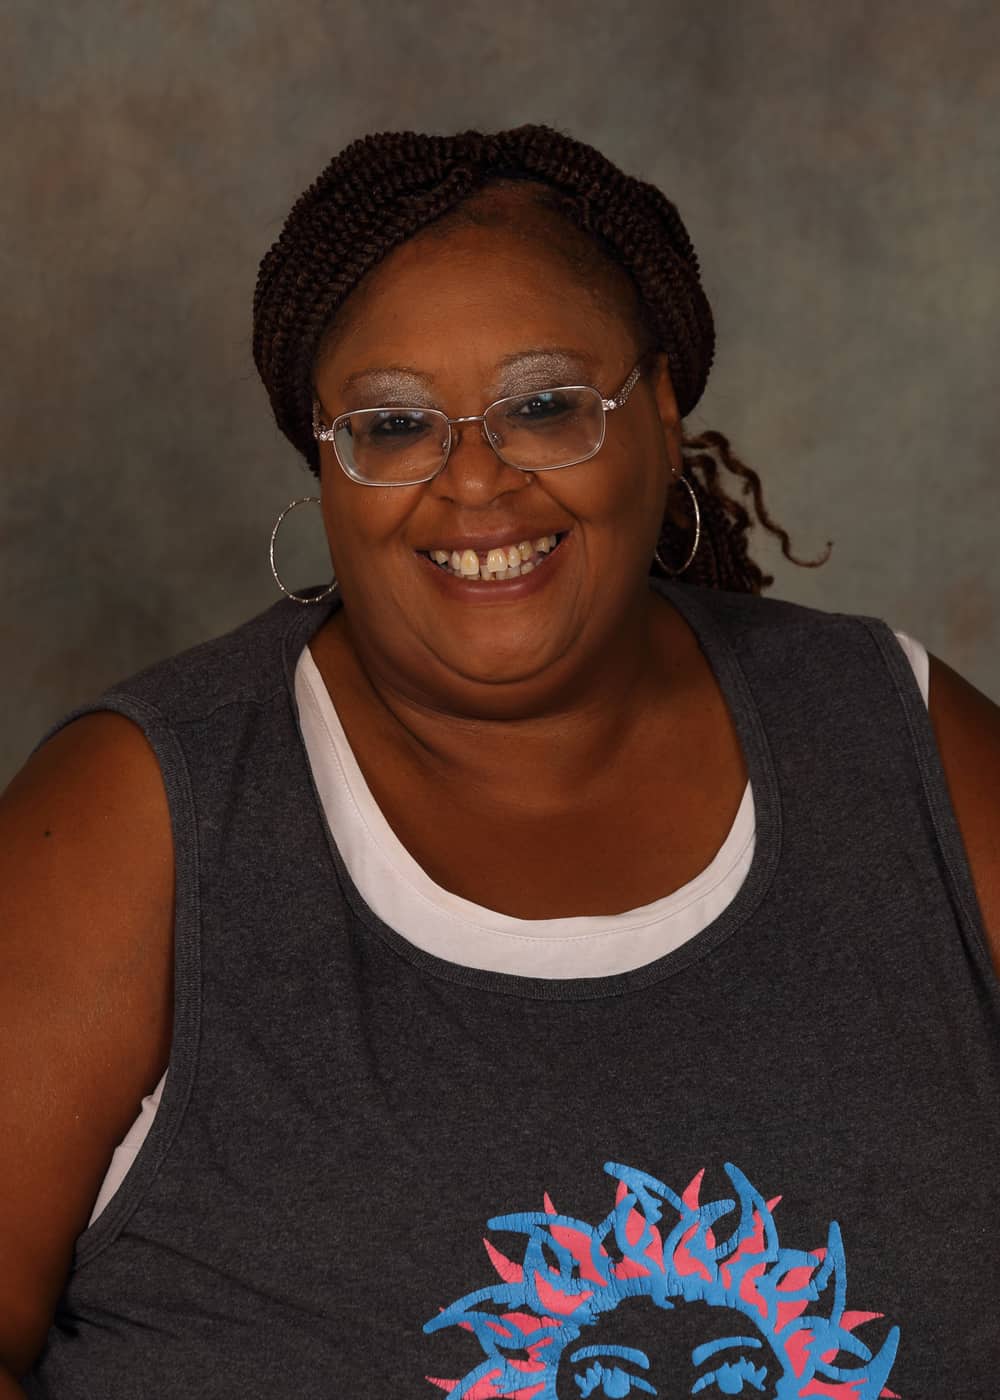 Photo of Program Director Priscilla McLin. She is an African-American woman with a bright smile, braided hair, hoop earrings and silver-rimmed glasses. She is wearing a dark gray shirt with a pink and blue picture of the Sun on it.